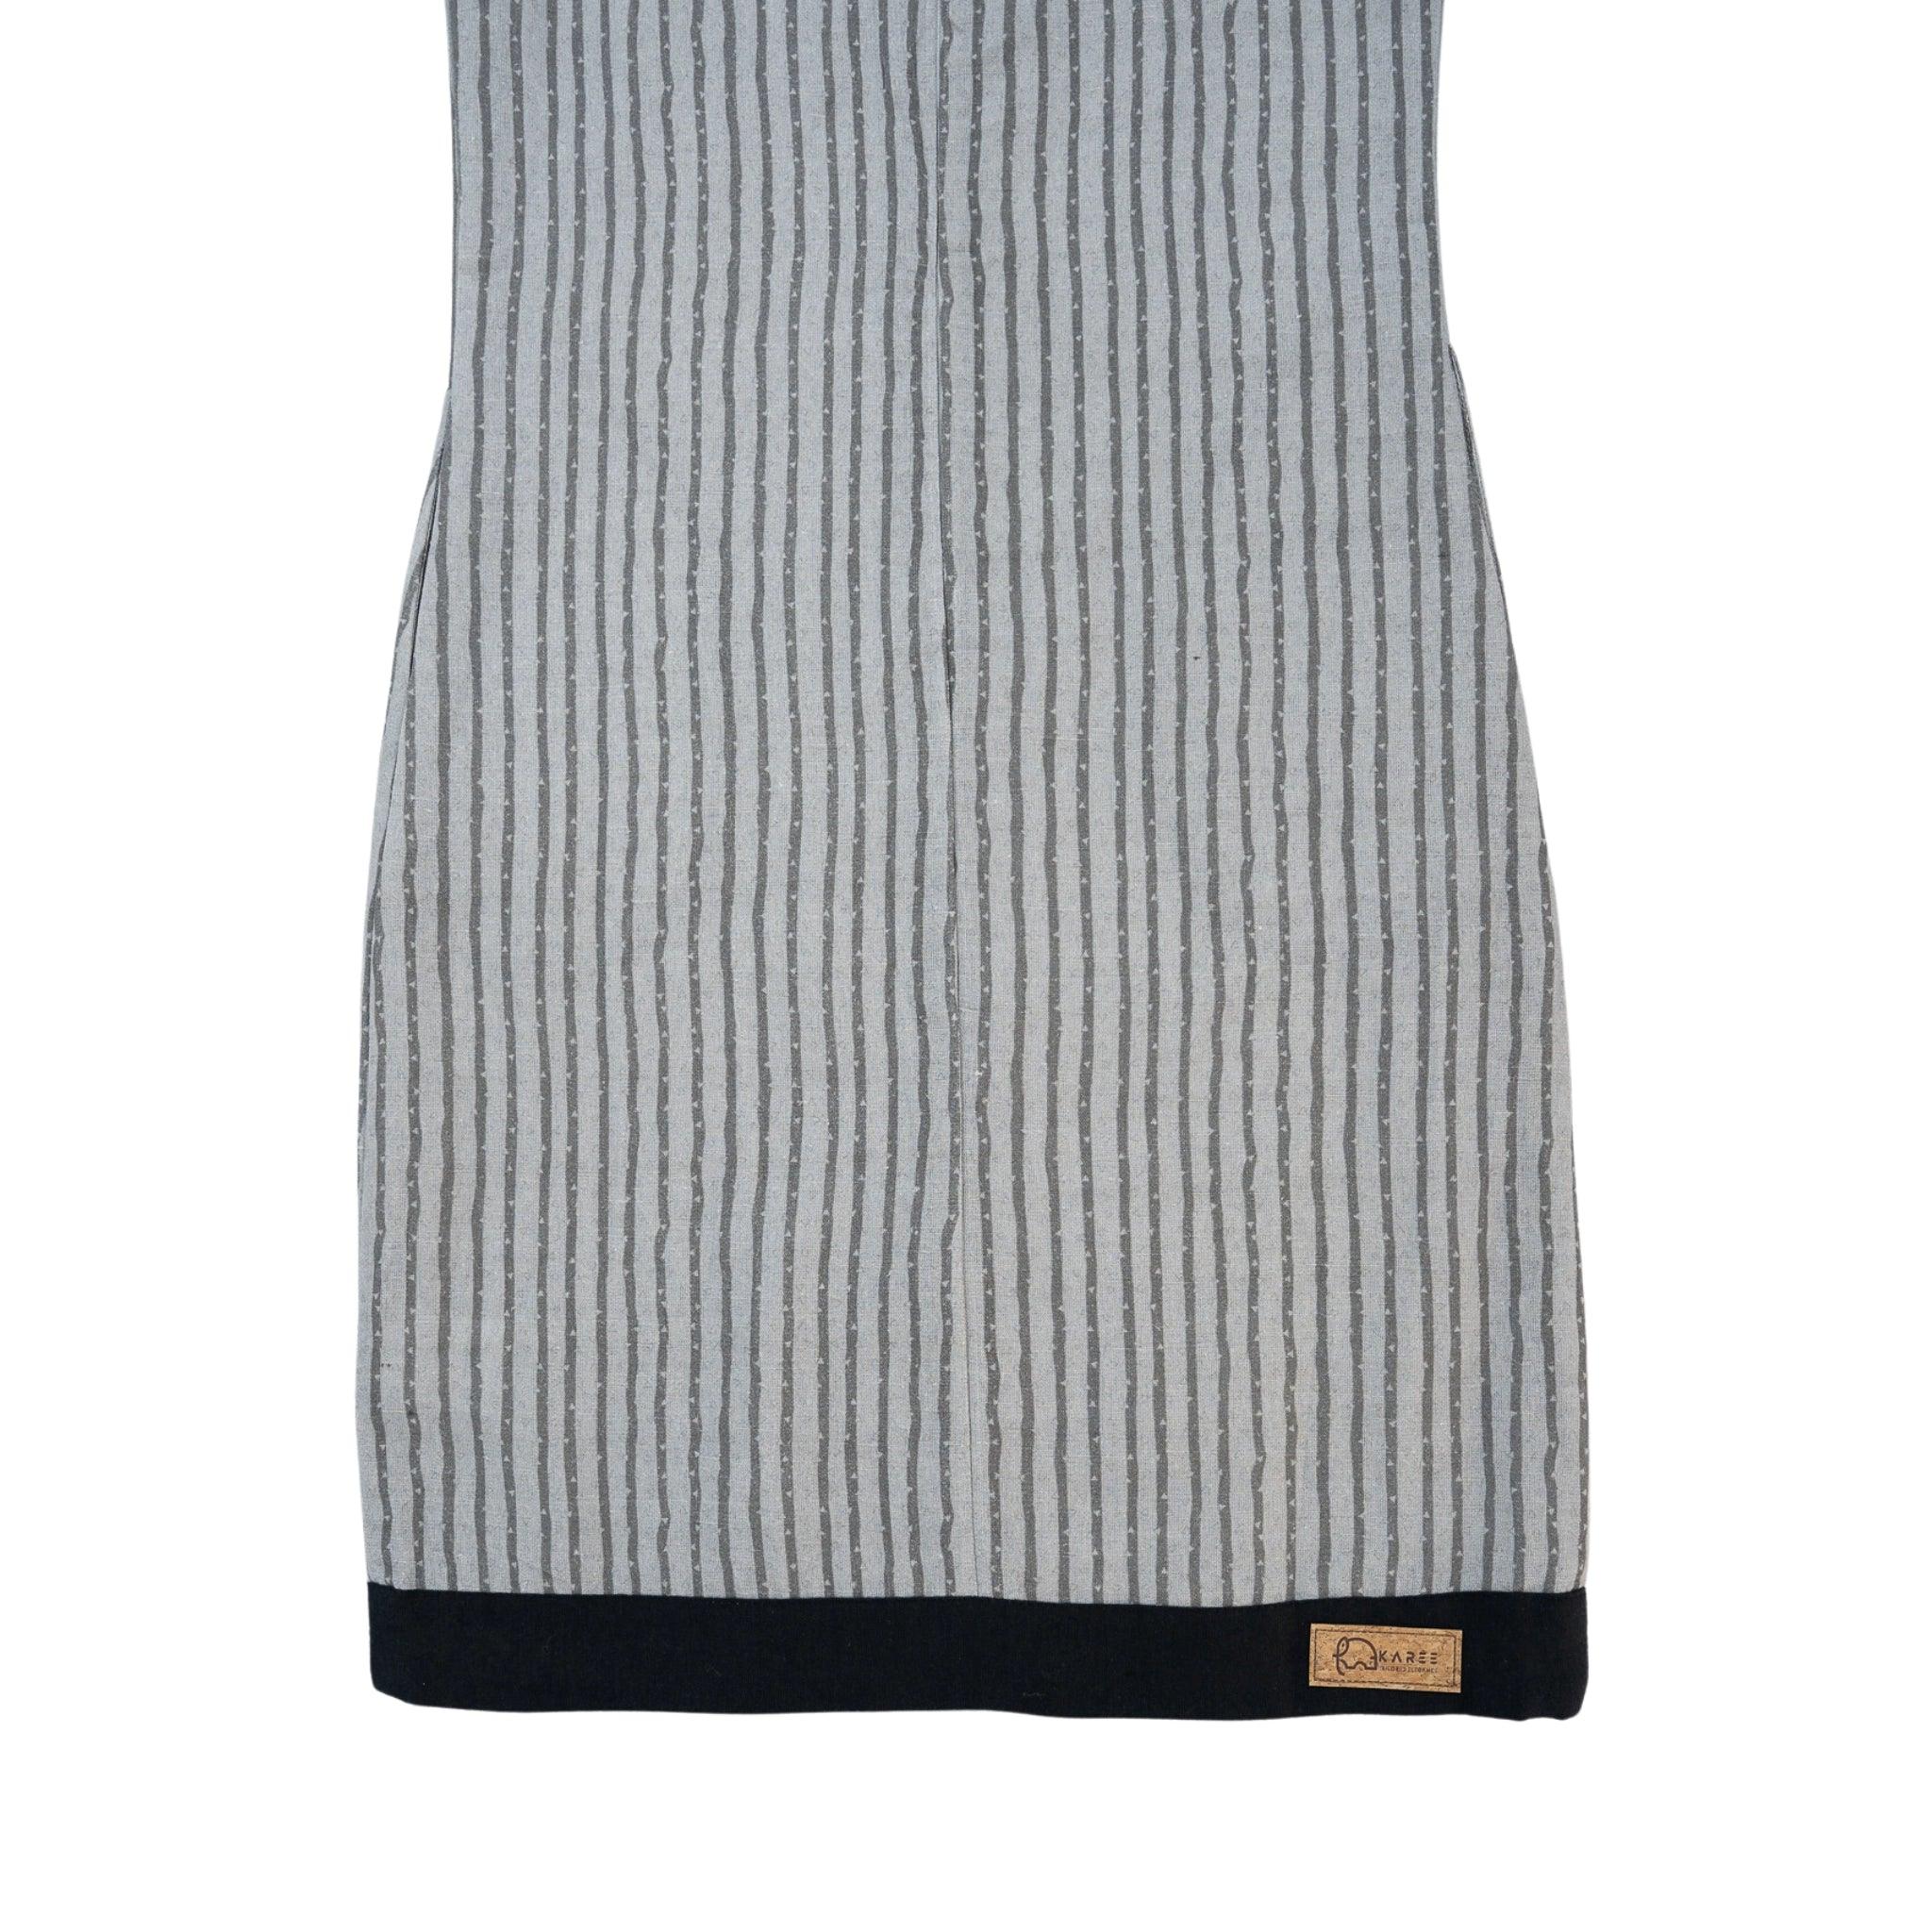 A steel grey, ribbed knit sleeveless top with a navy blue hem, featuring a small logo tag on the lower right side, displayed against a white background. 

Product Name: Linen Cotton Round Neck Frock for Kids in Steel Grey
Brand Name: Karee